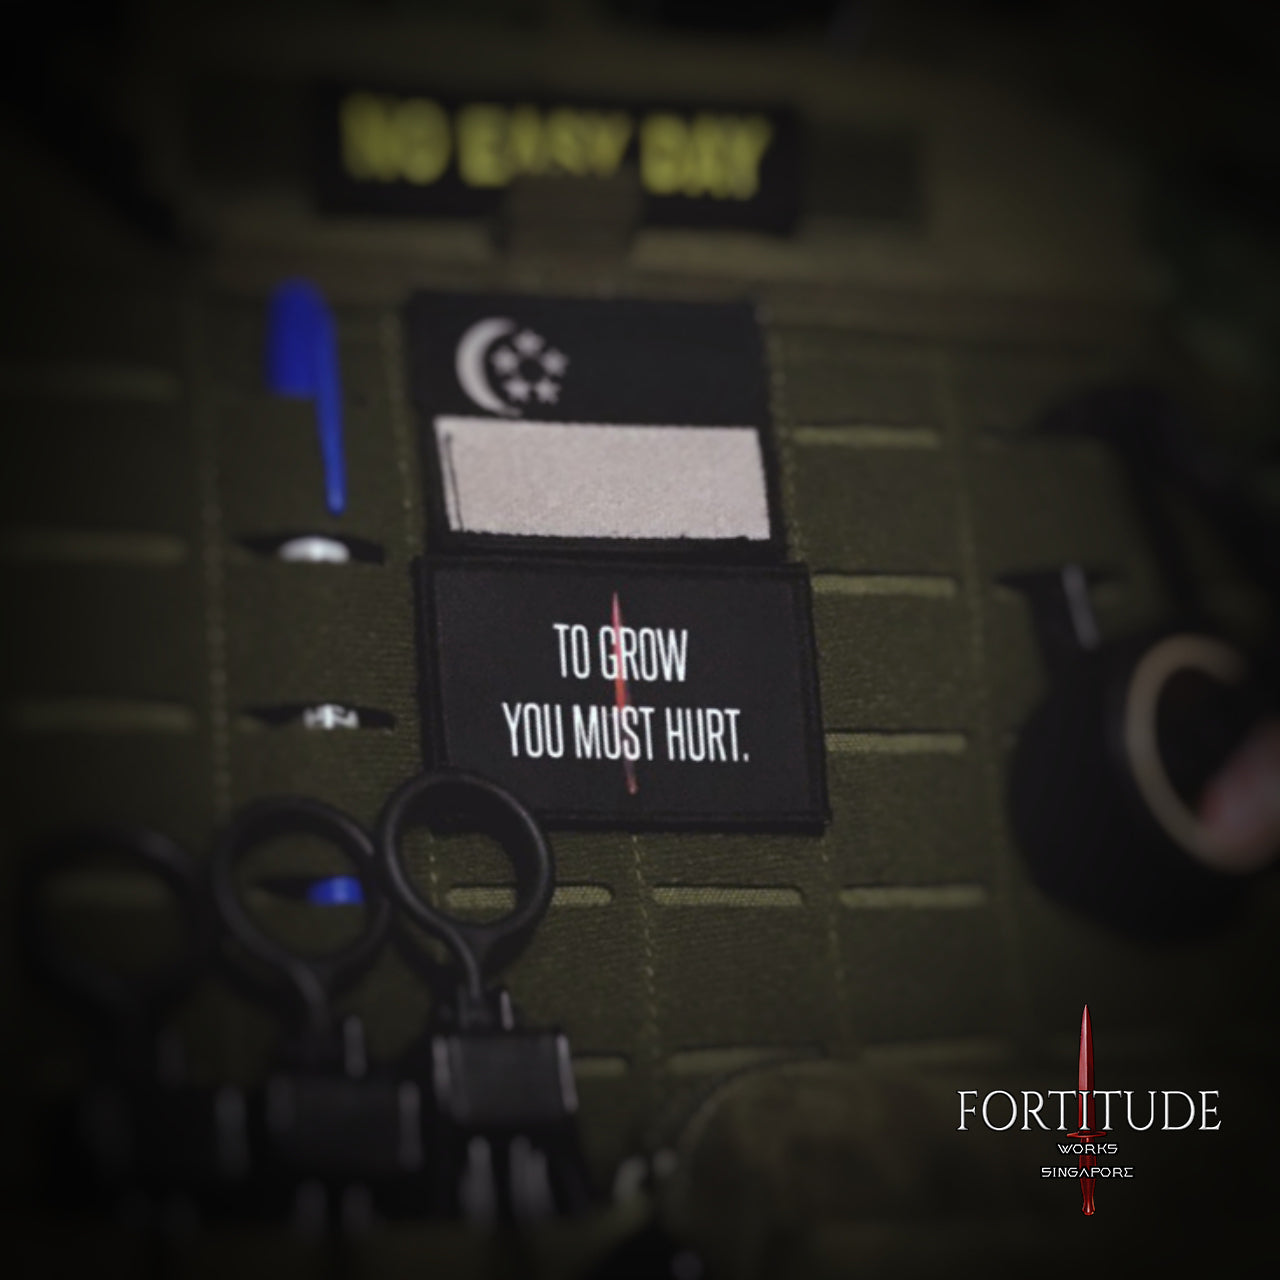 TO GROW YOU MUST HURT - FORTITUDE WORKS SINGAPORE